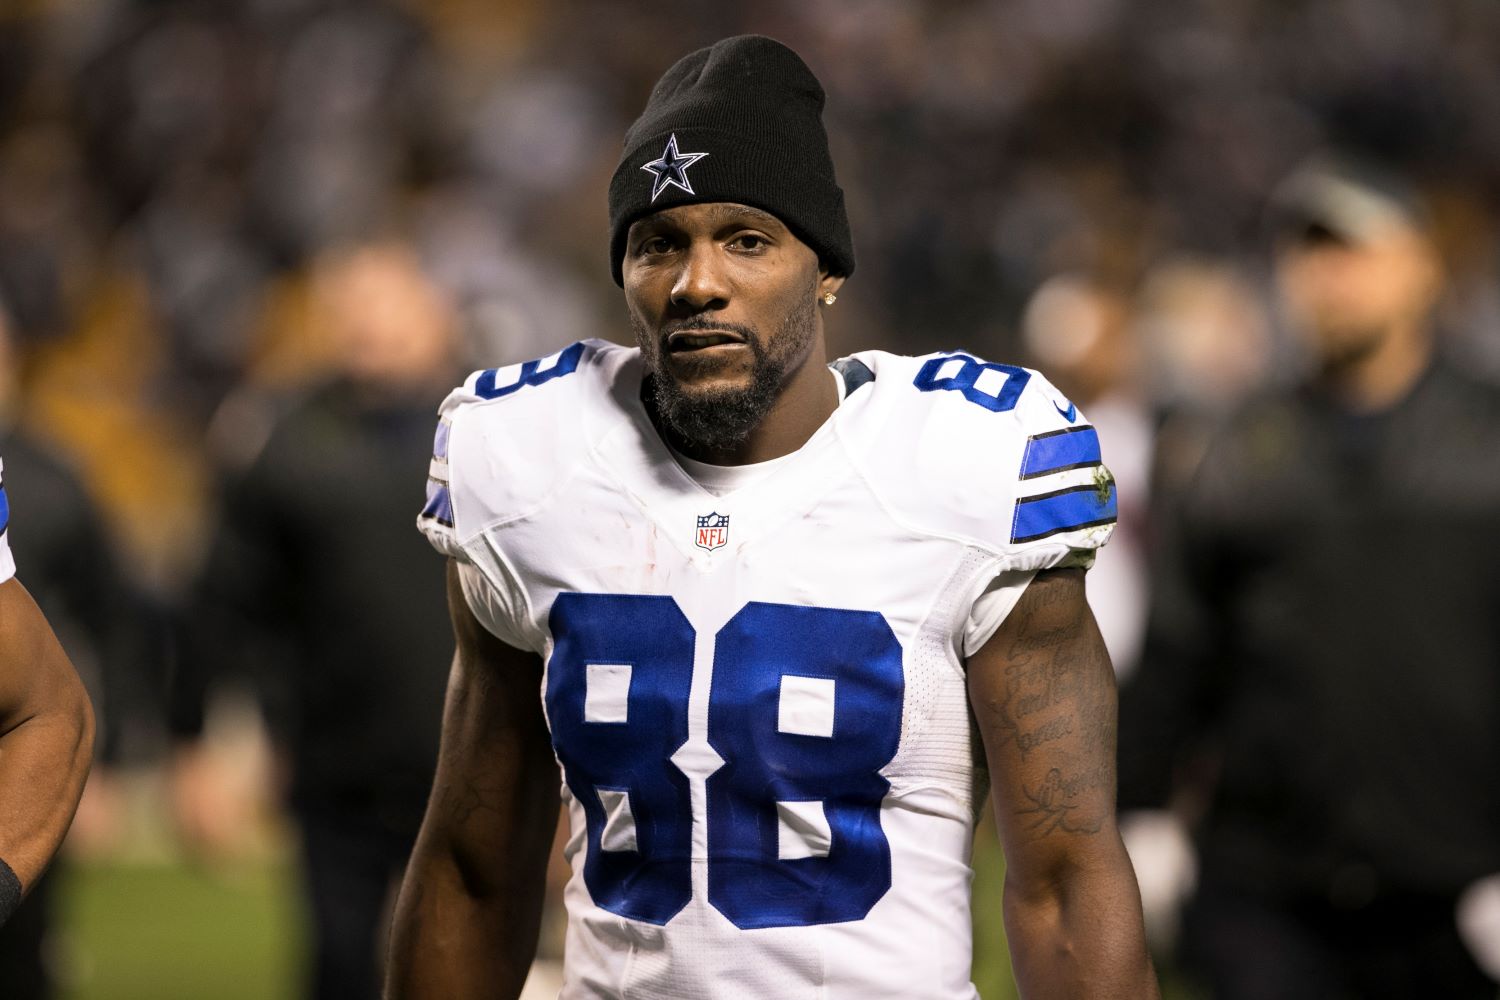 Dez Bryant suffered an emotional loss during his penultimate season with the Dallas Cowboys when his father died unexpectedly.